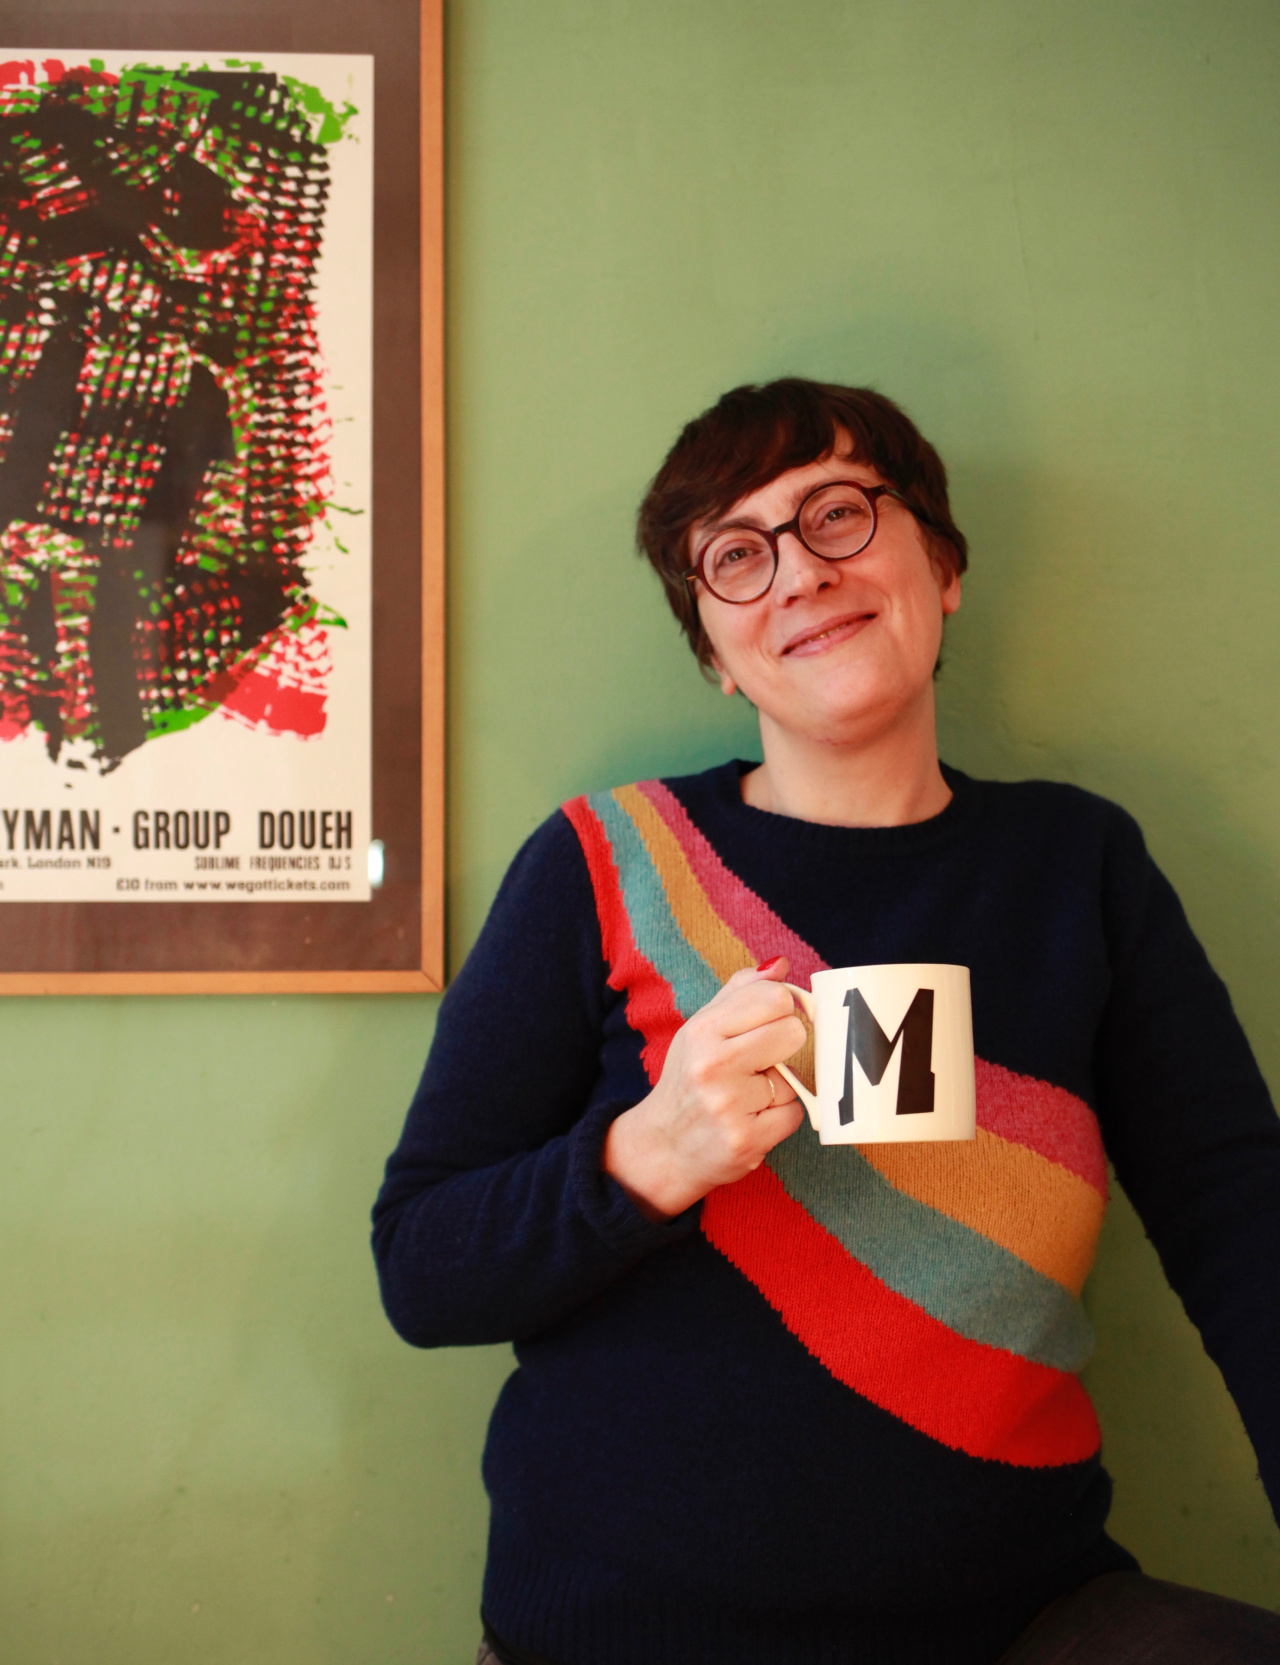 The pictures shows Marie Pierre smilying into the camera and holding a cup with the letter M on it.